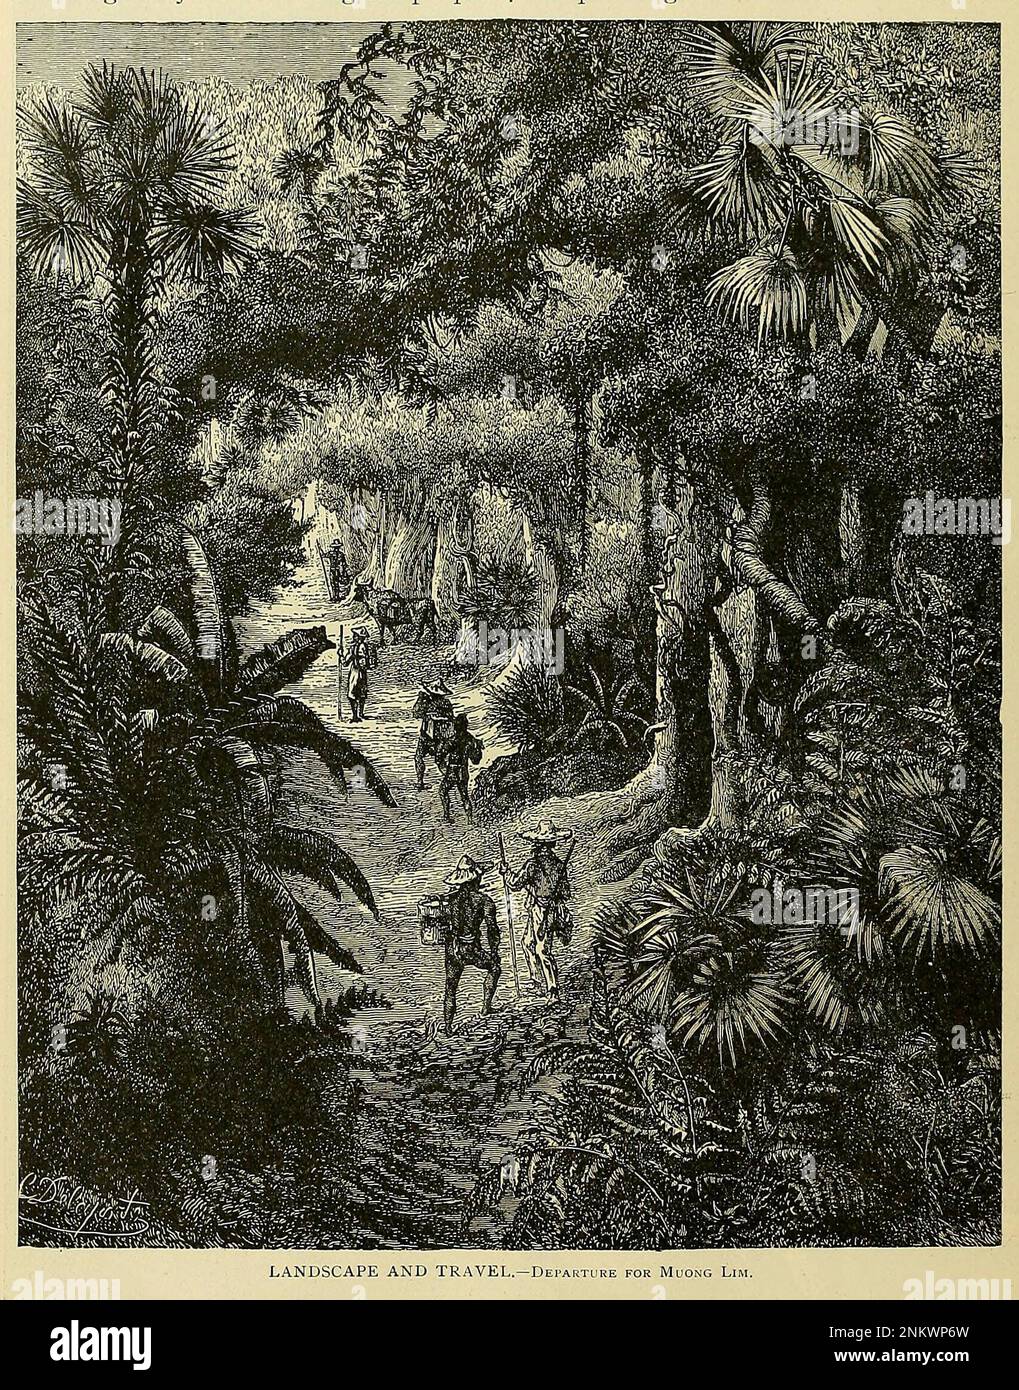 Landscape and Travel Departure for Muong Lim Book XX Indo-China from Cyclopedia universal history : embracing the most complete and recent presentation of the subject in two principal parts or divisions of more than six thousand pages by John Clark Ridpath, 1840-1900 Publication date 1895 Publisher Boston : Balch Bros. Volume 6 History of Man and Mankind Stock Photo